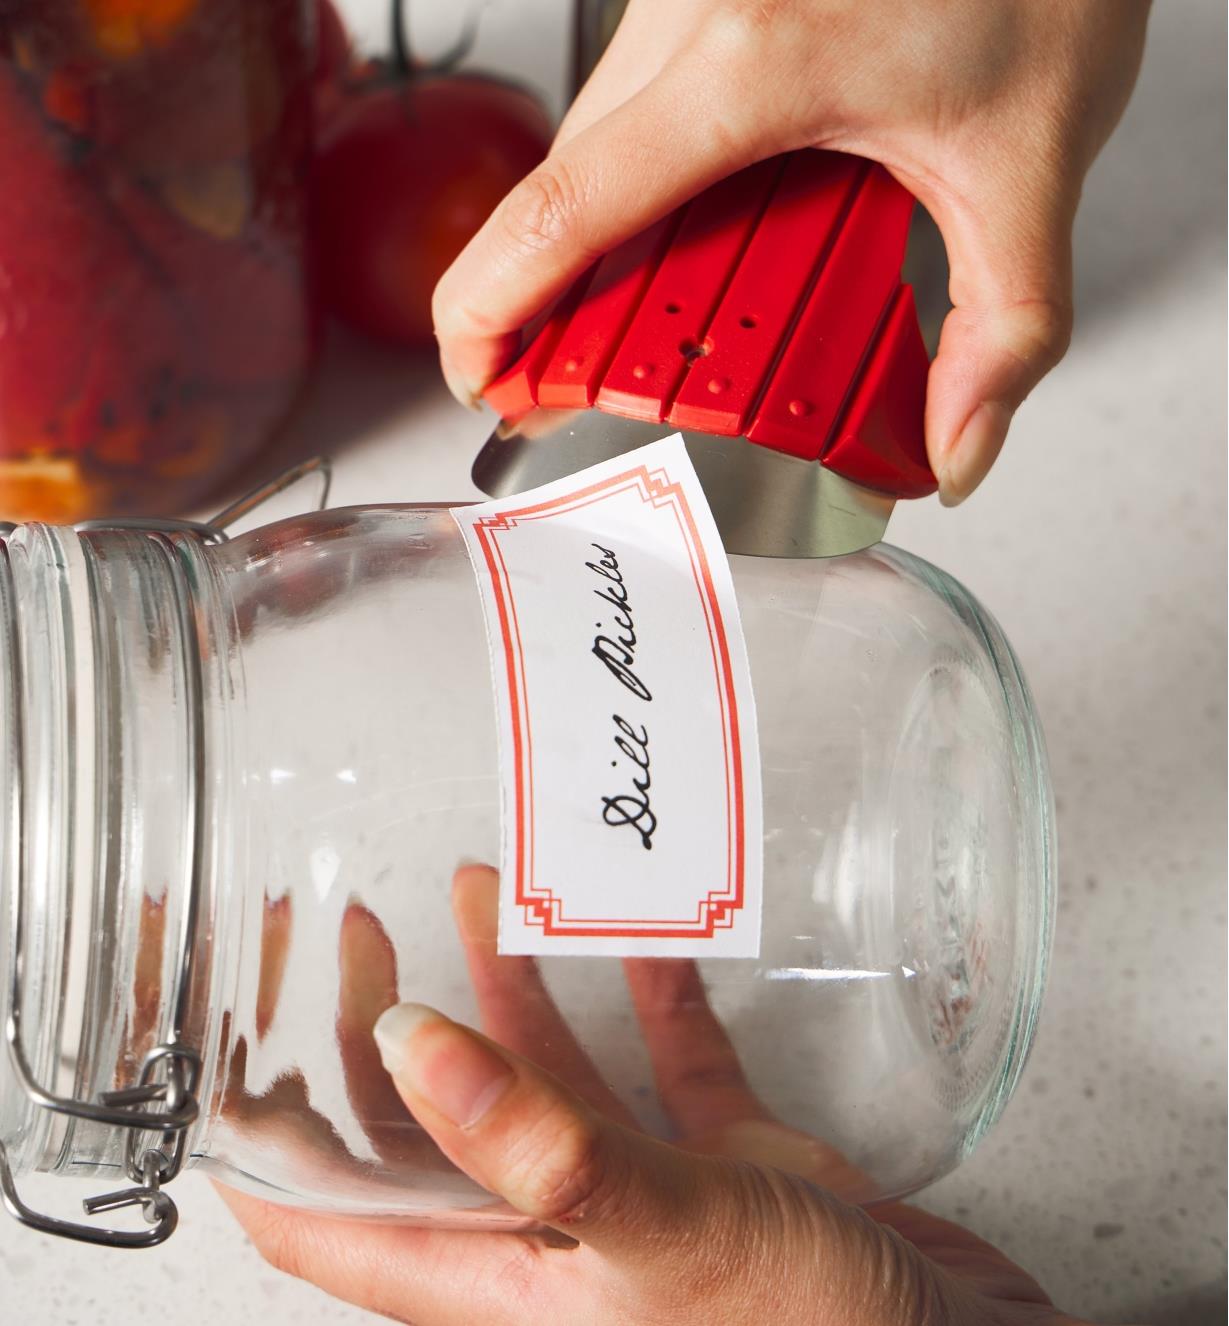 Using the regular scraper to remove a label from a jar